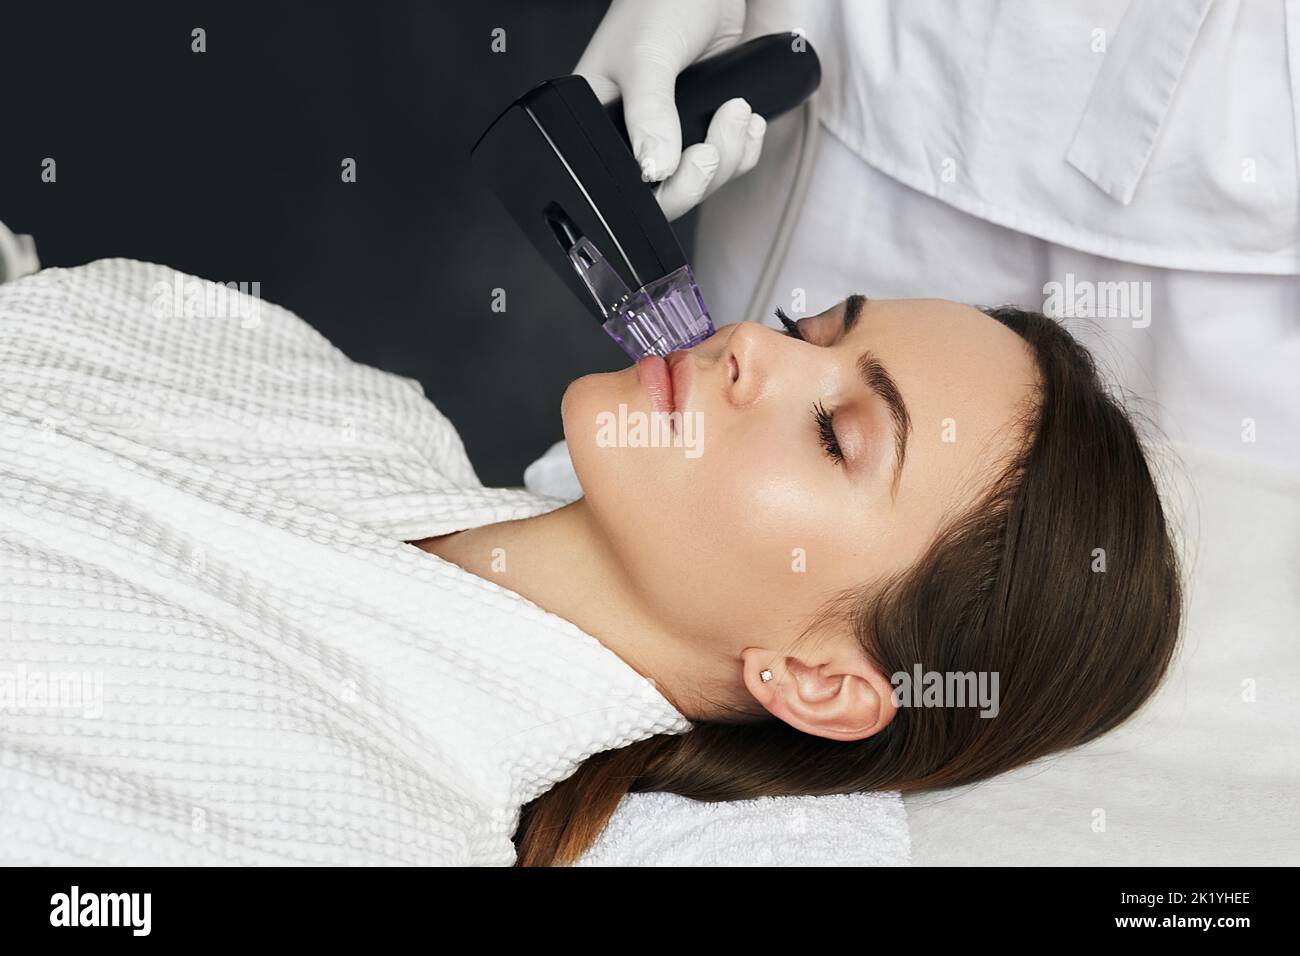 Brunette woman receiving radiofrequency lifting procedure for her face skin rejuvenation at aesthetic cosmetology clinic Stock Photo